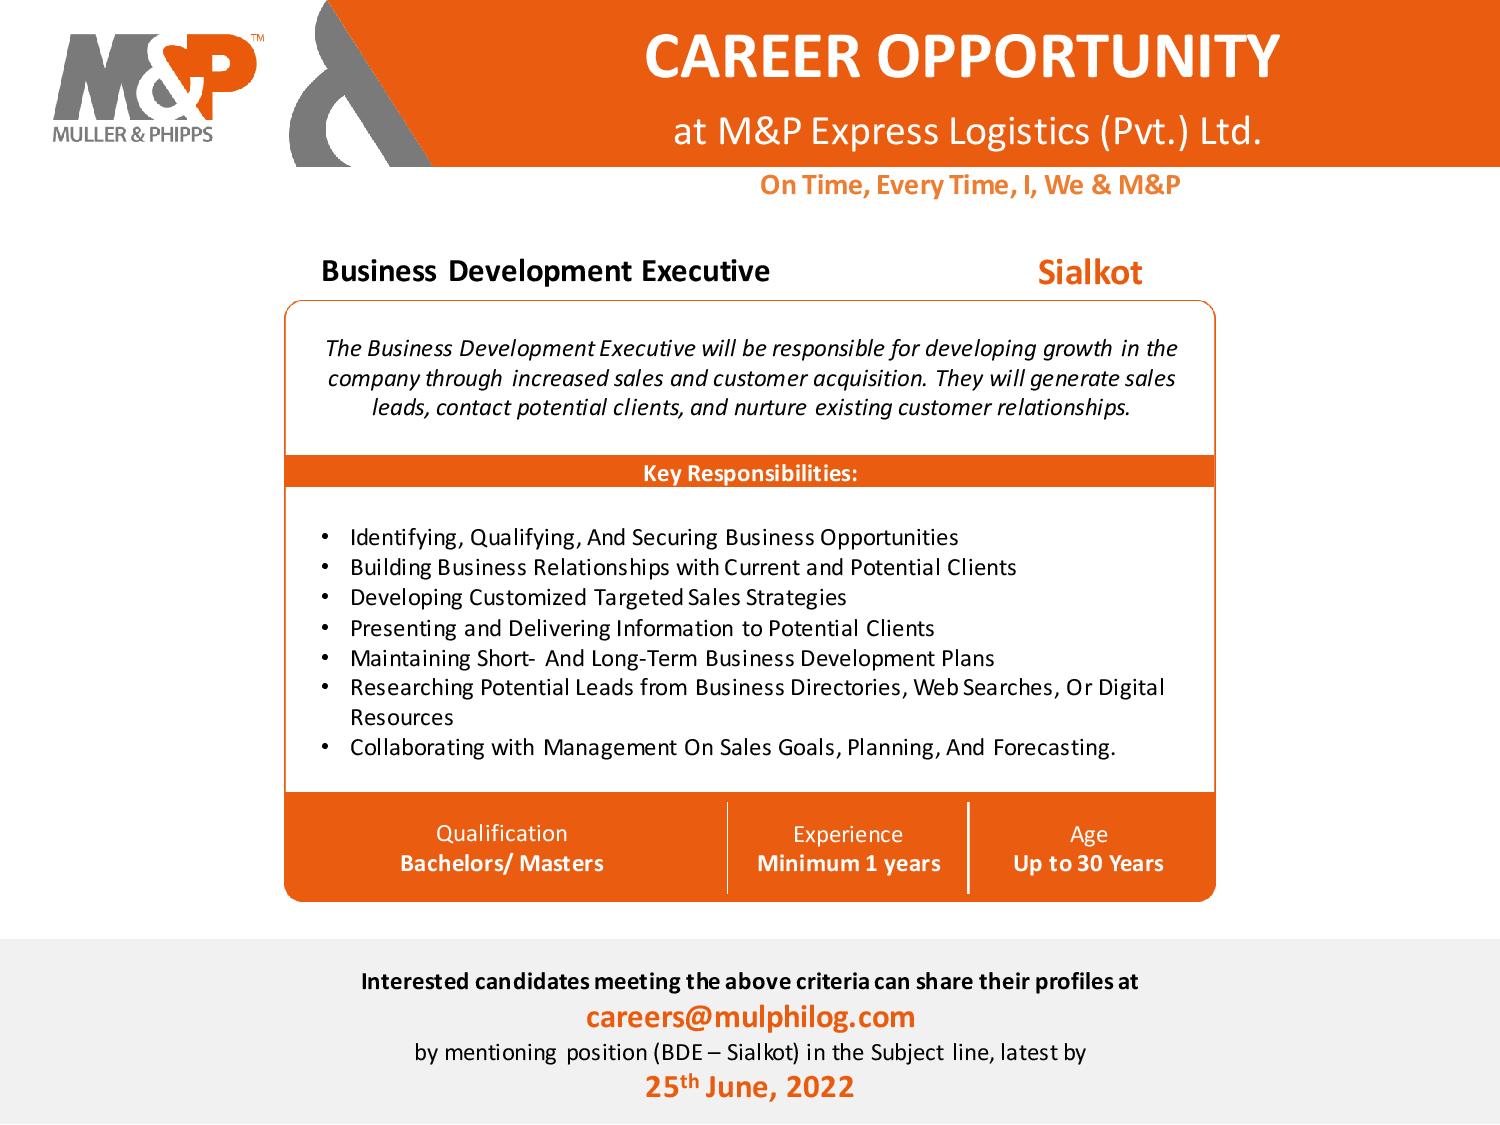 Business Development Executive opportunity at M&P Express Logistics